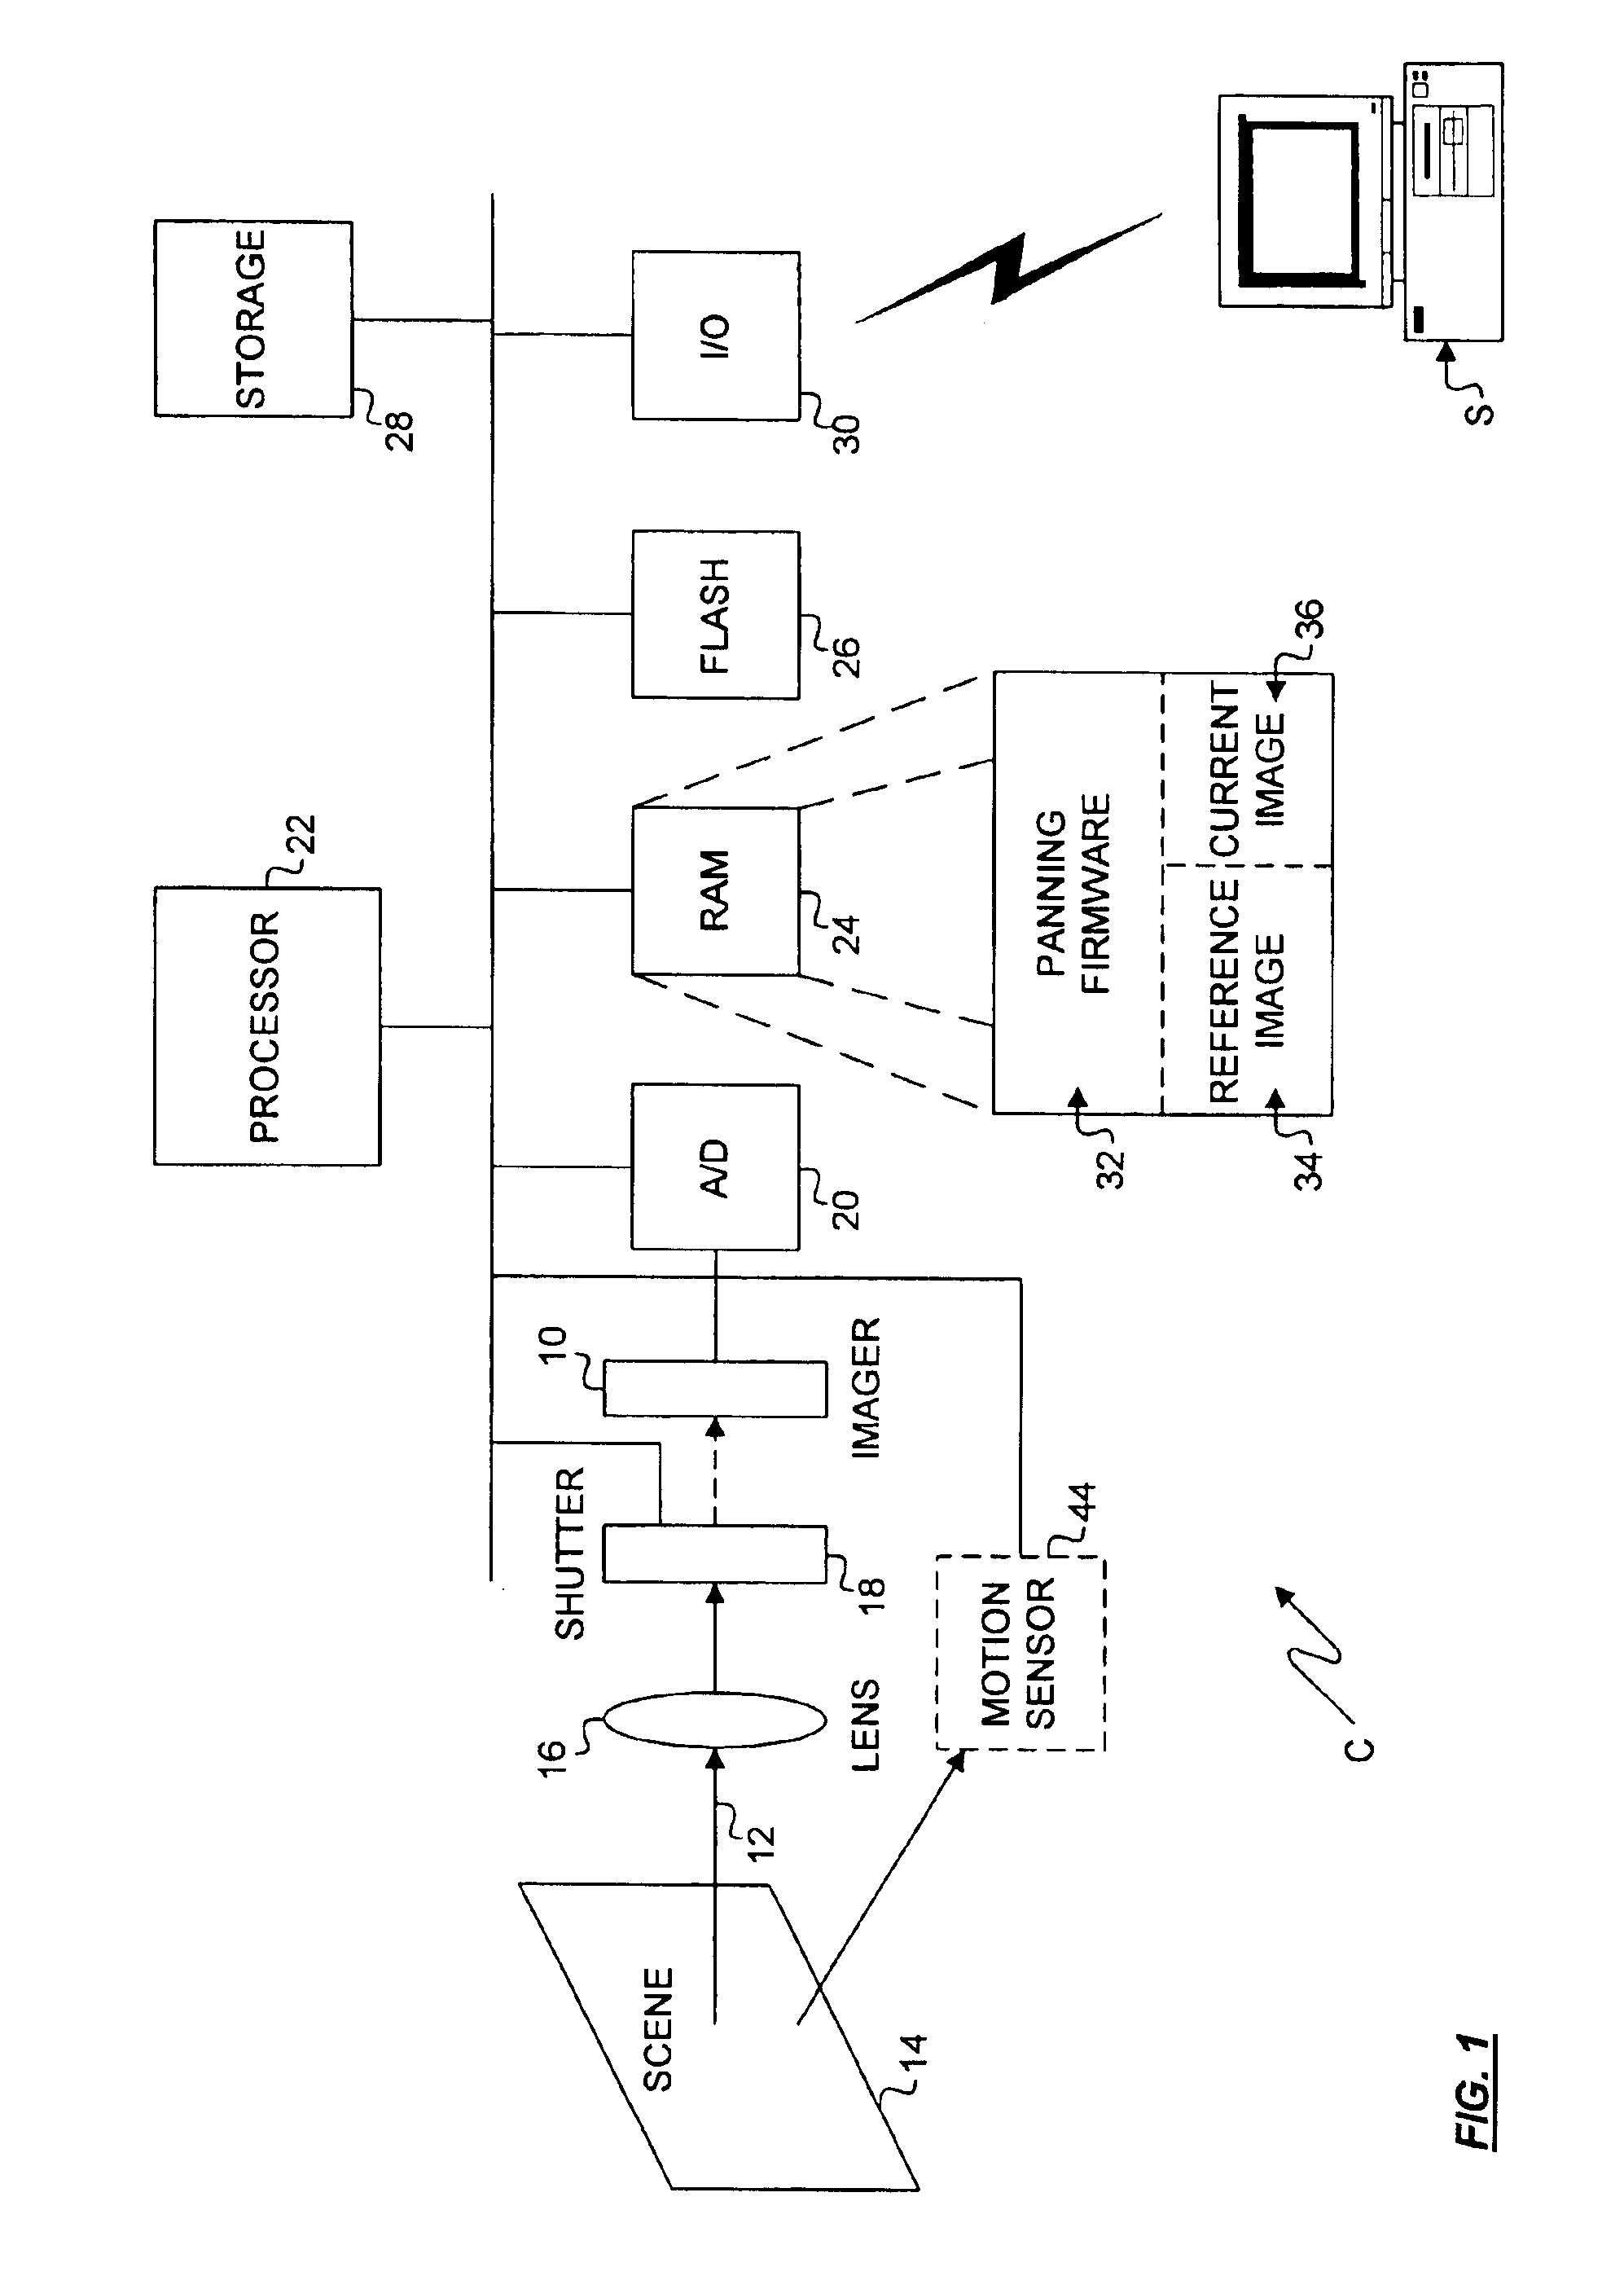 Method and apparatus for automatically capturing a plurality of images during a pan